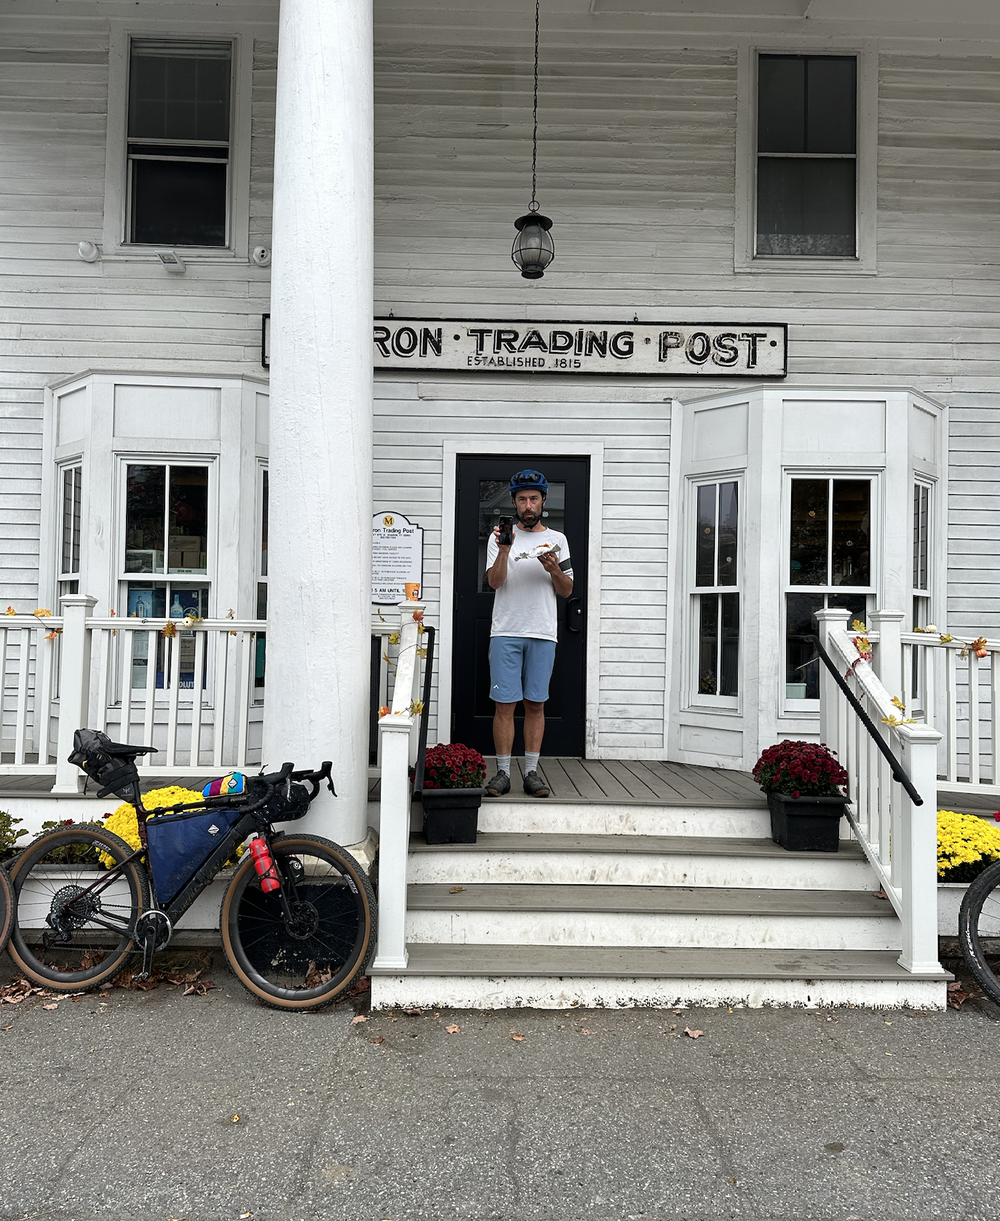 Many a general store to refuel